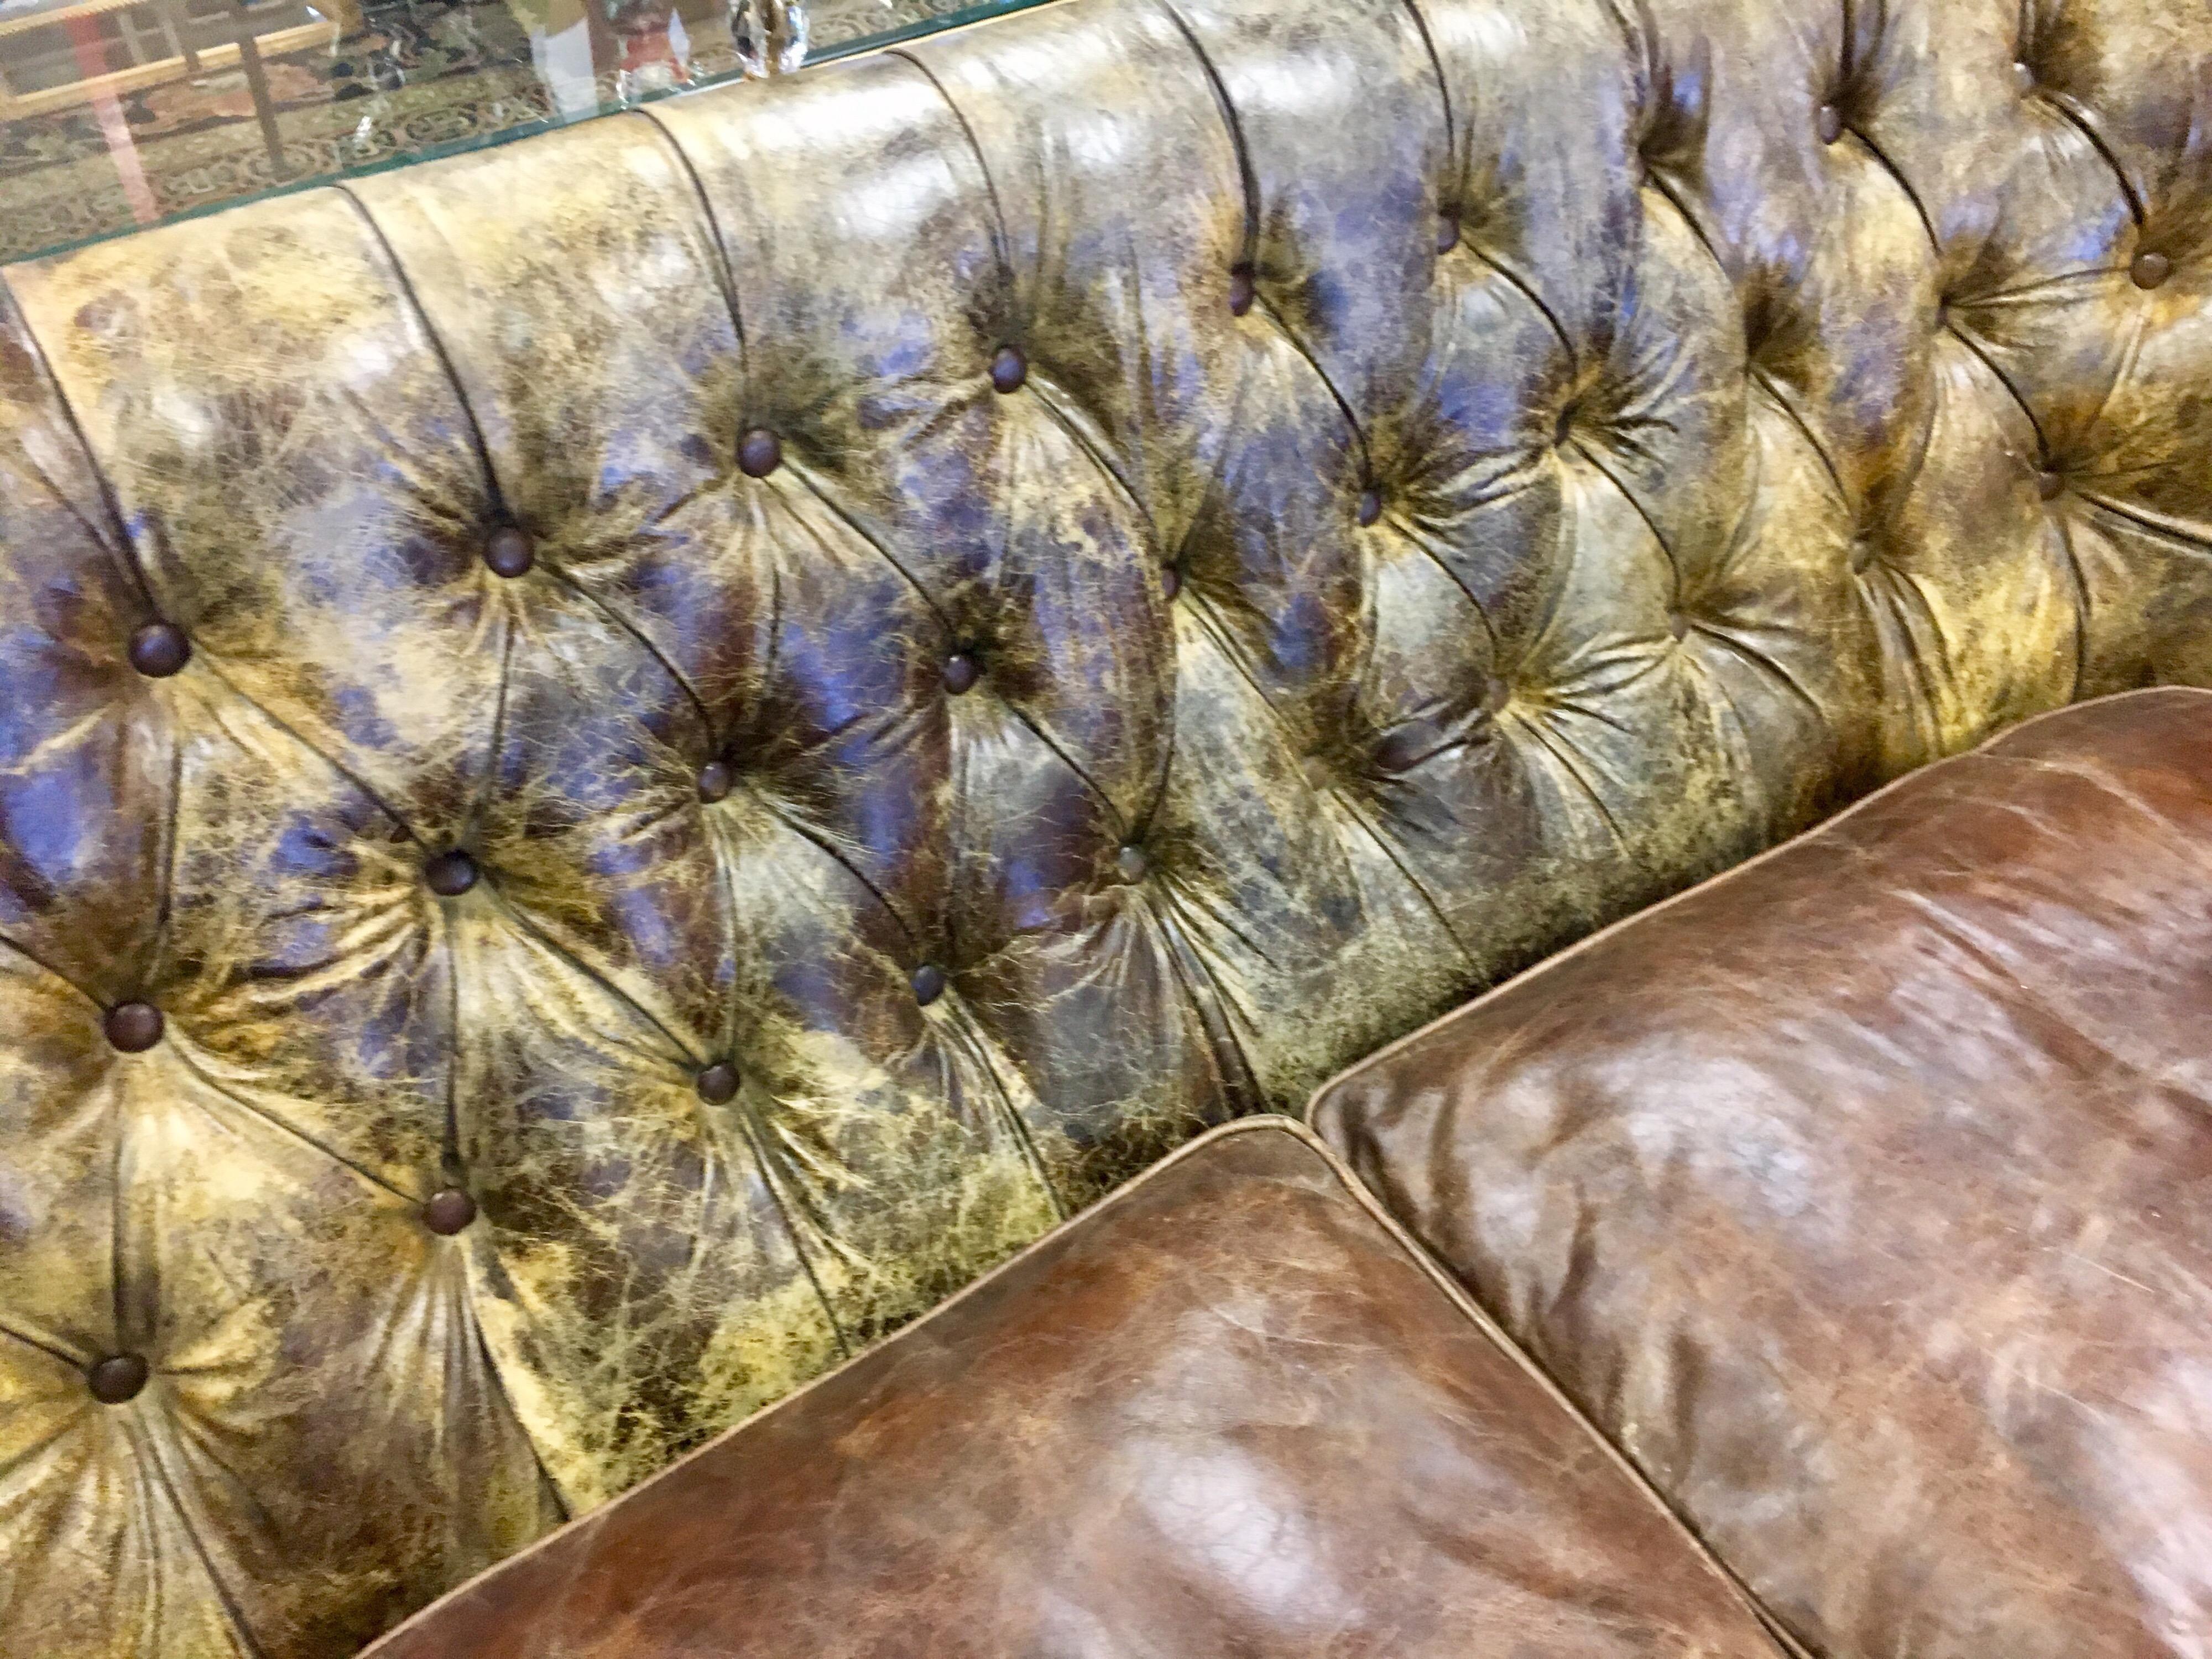 distressed leather couch